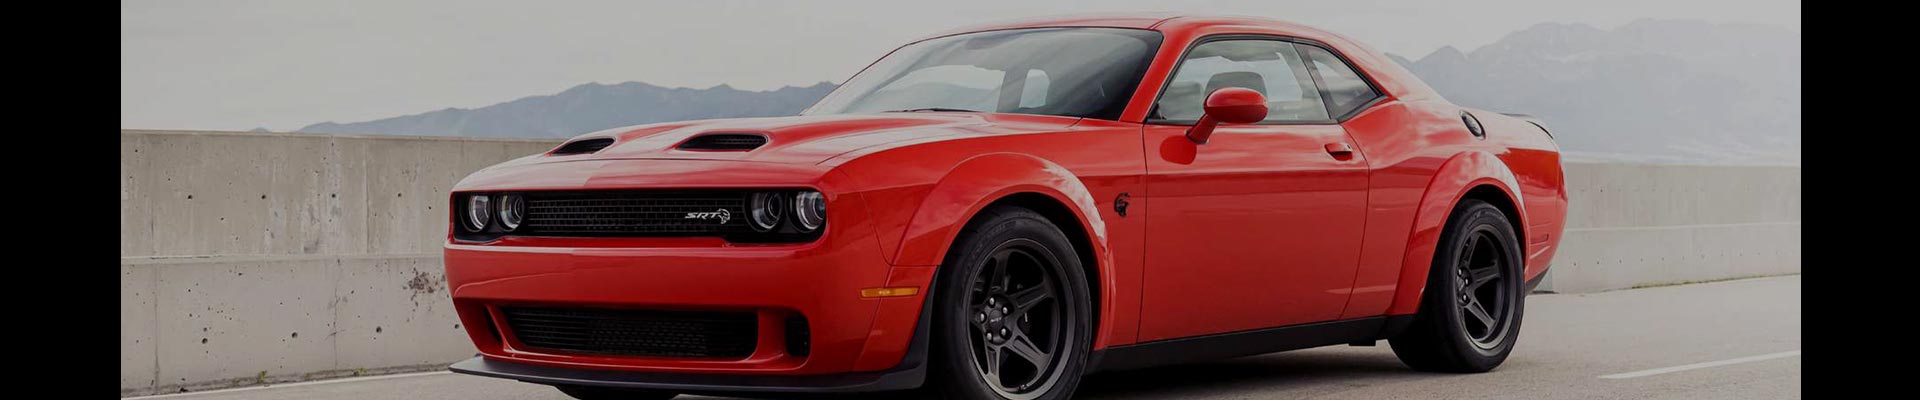 Shop Replacement and OEM 2015 Dodge Challenger Parts with Discounted Price on the Net